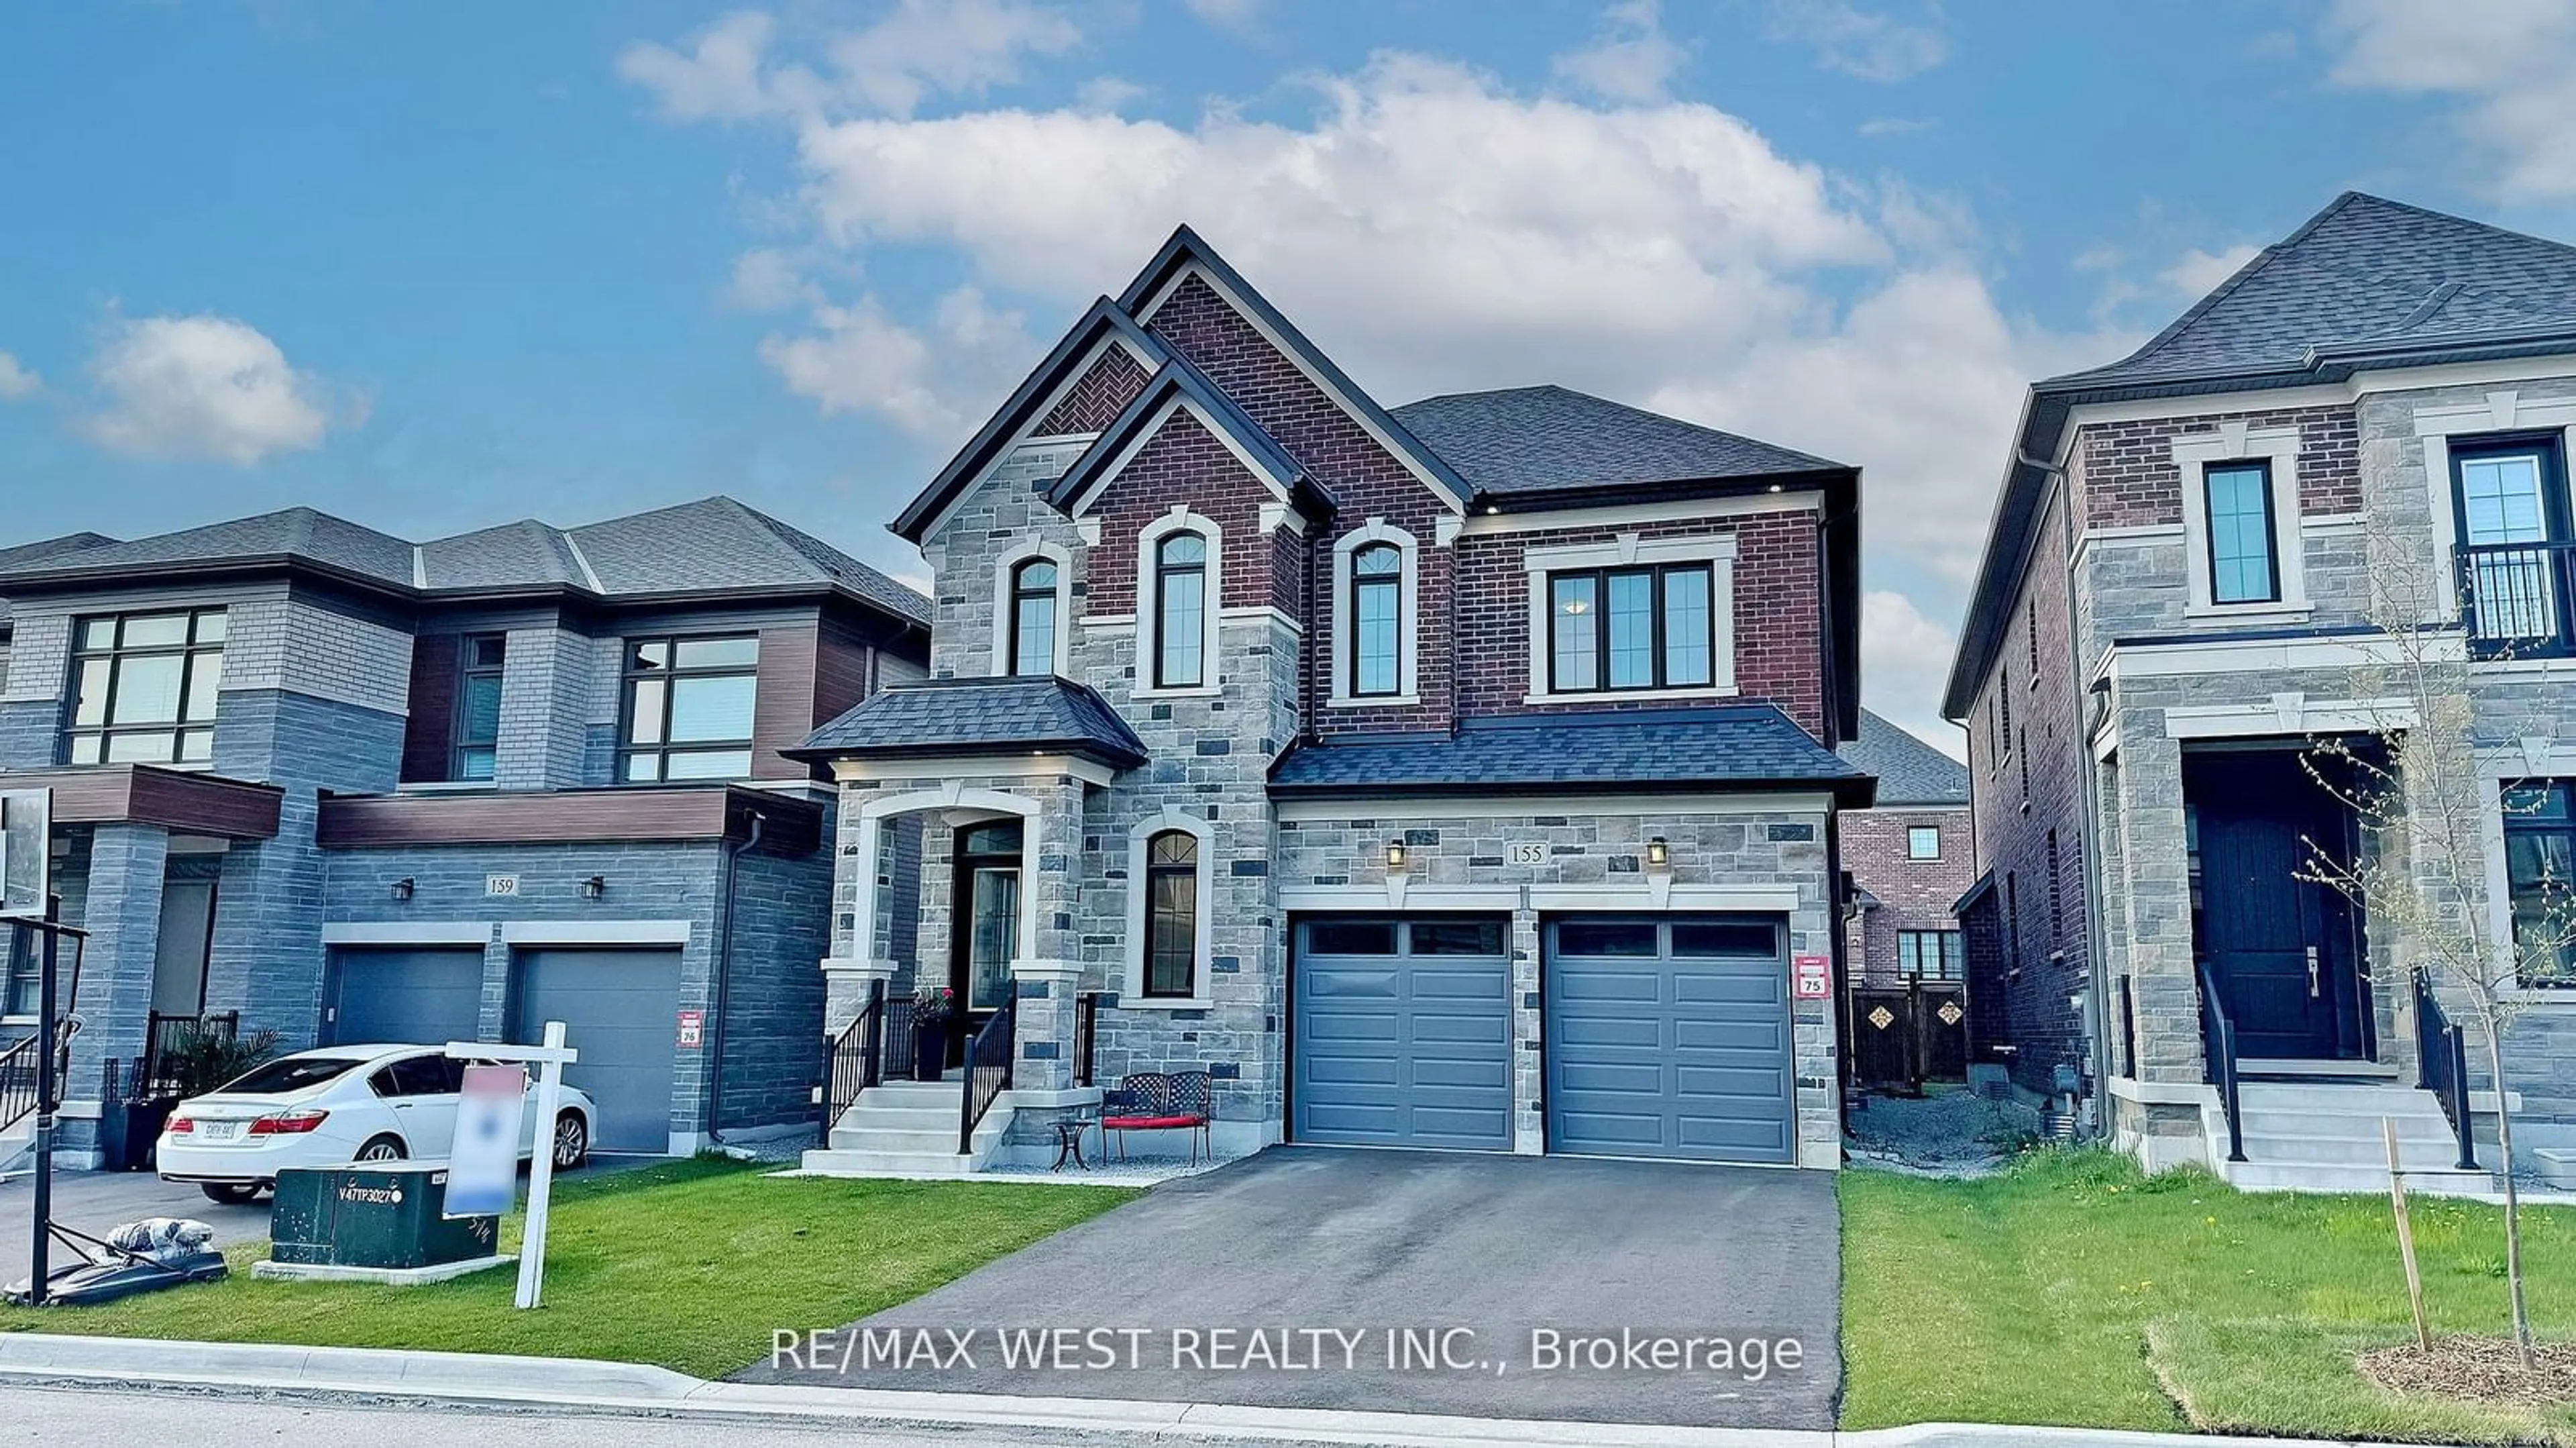 Home with brick exterior material for 155 Wainfleet Cres, Vaughan Ontario L3L 0E6